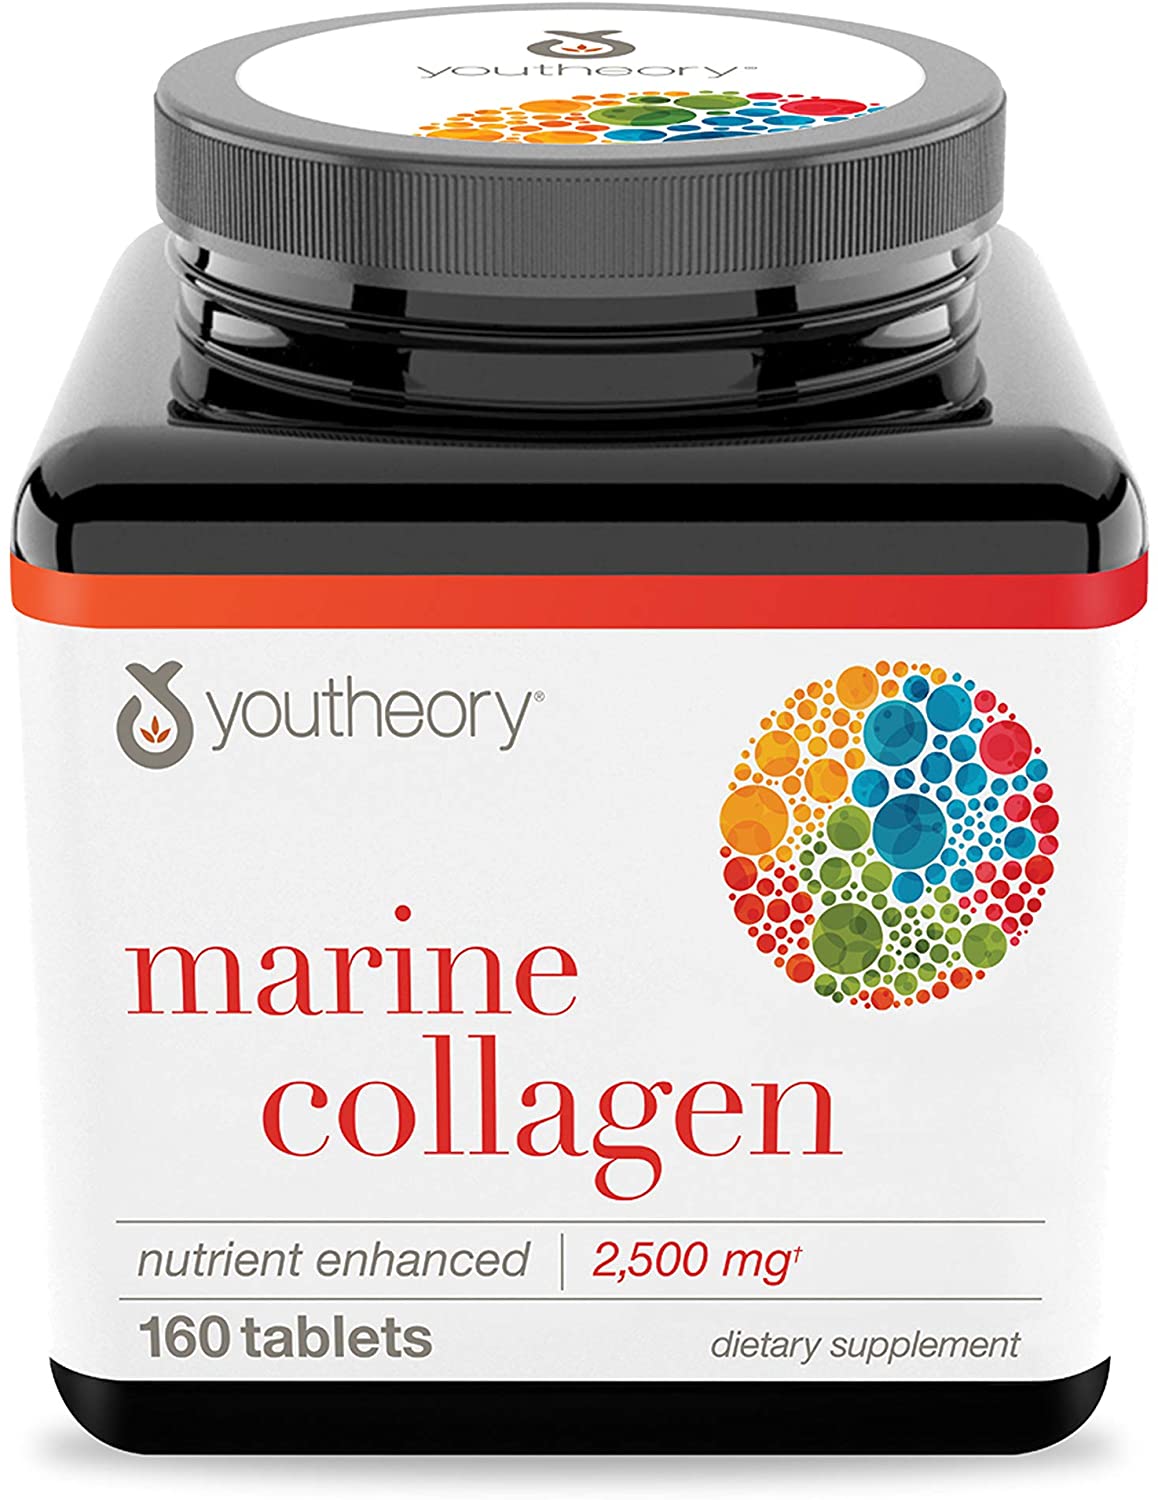 Youtheory Marine Collagen - 160 Tablet